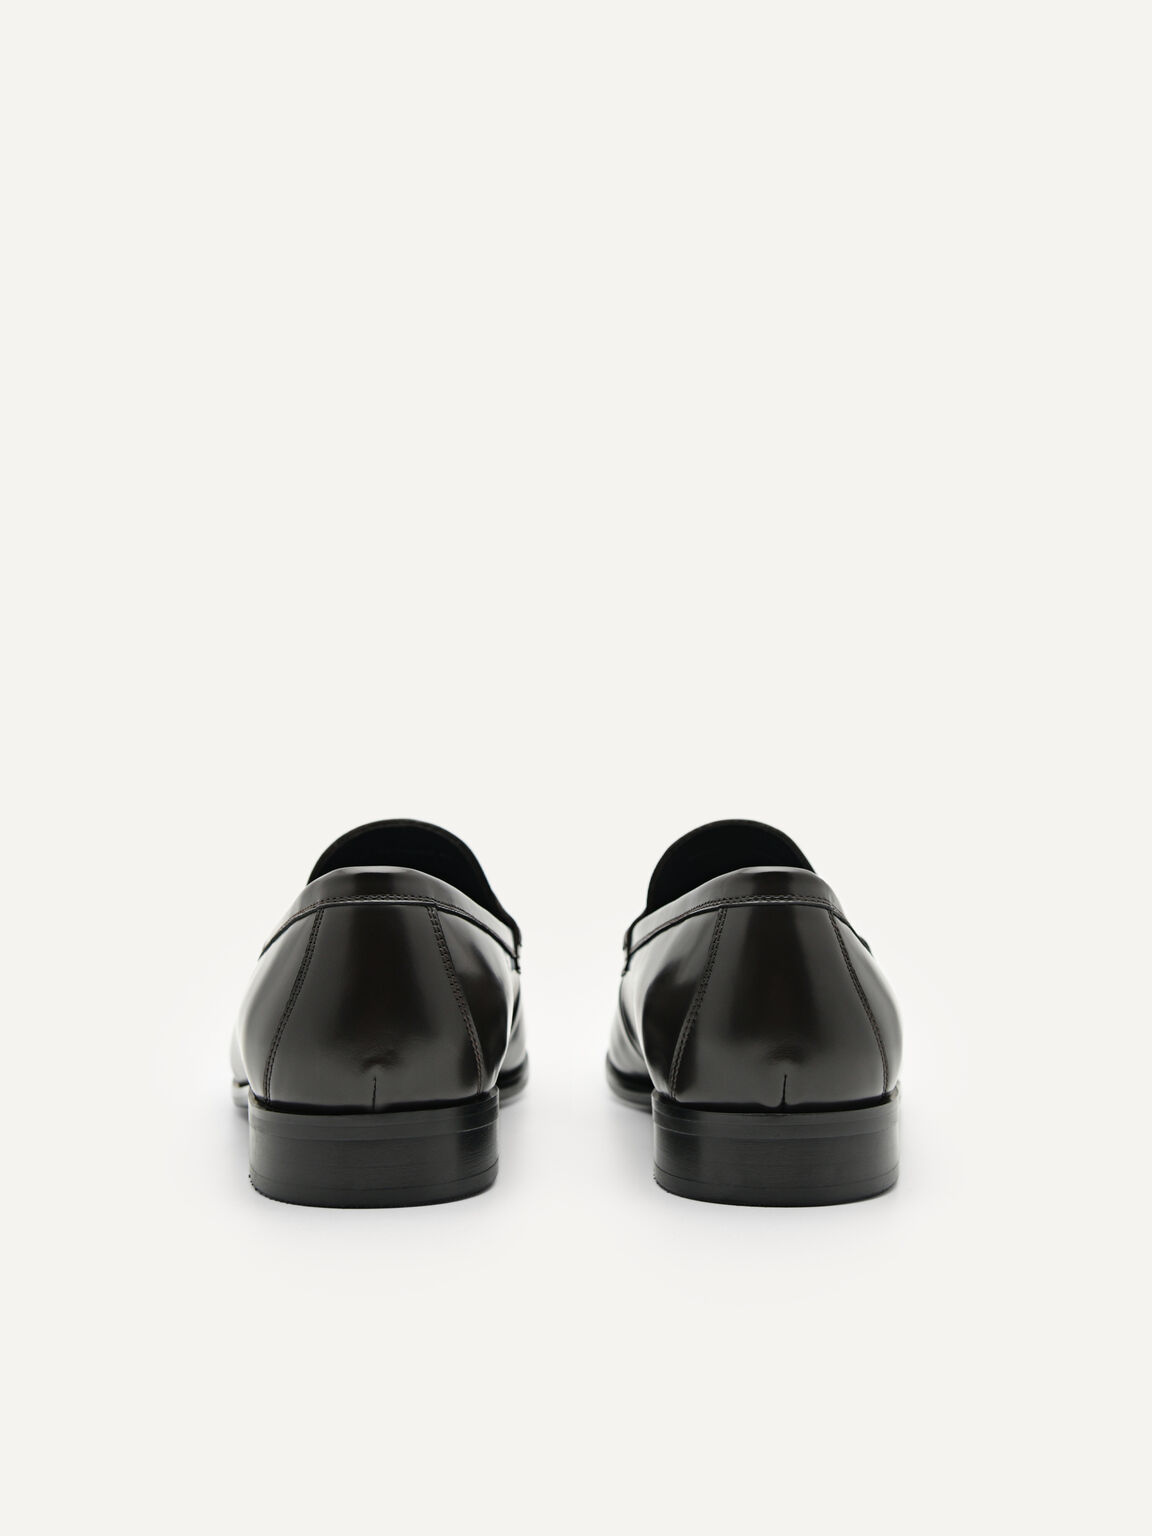 Leather Penny Loafers - PEDRO US